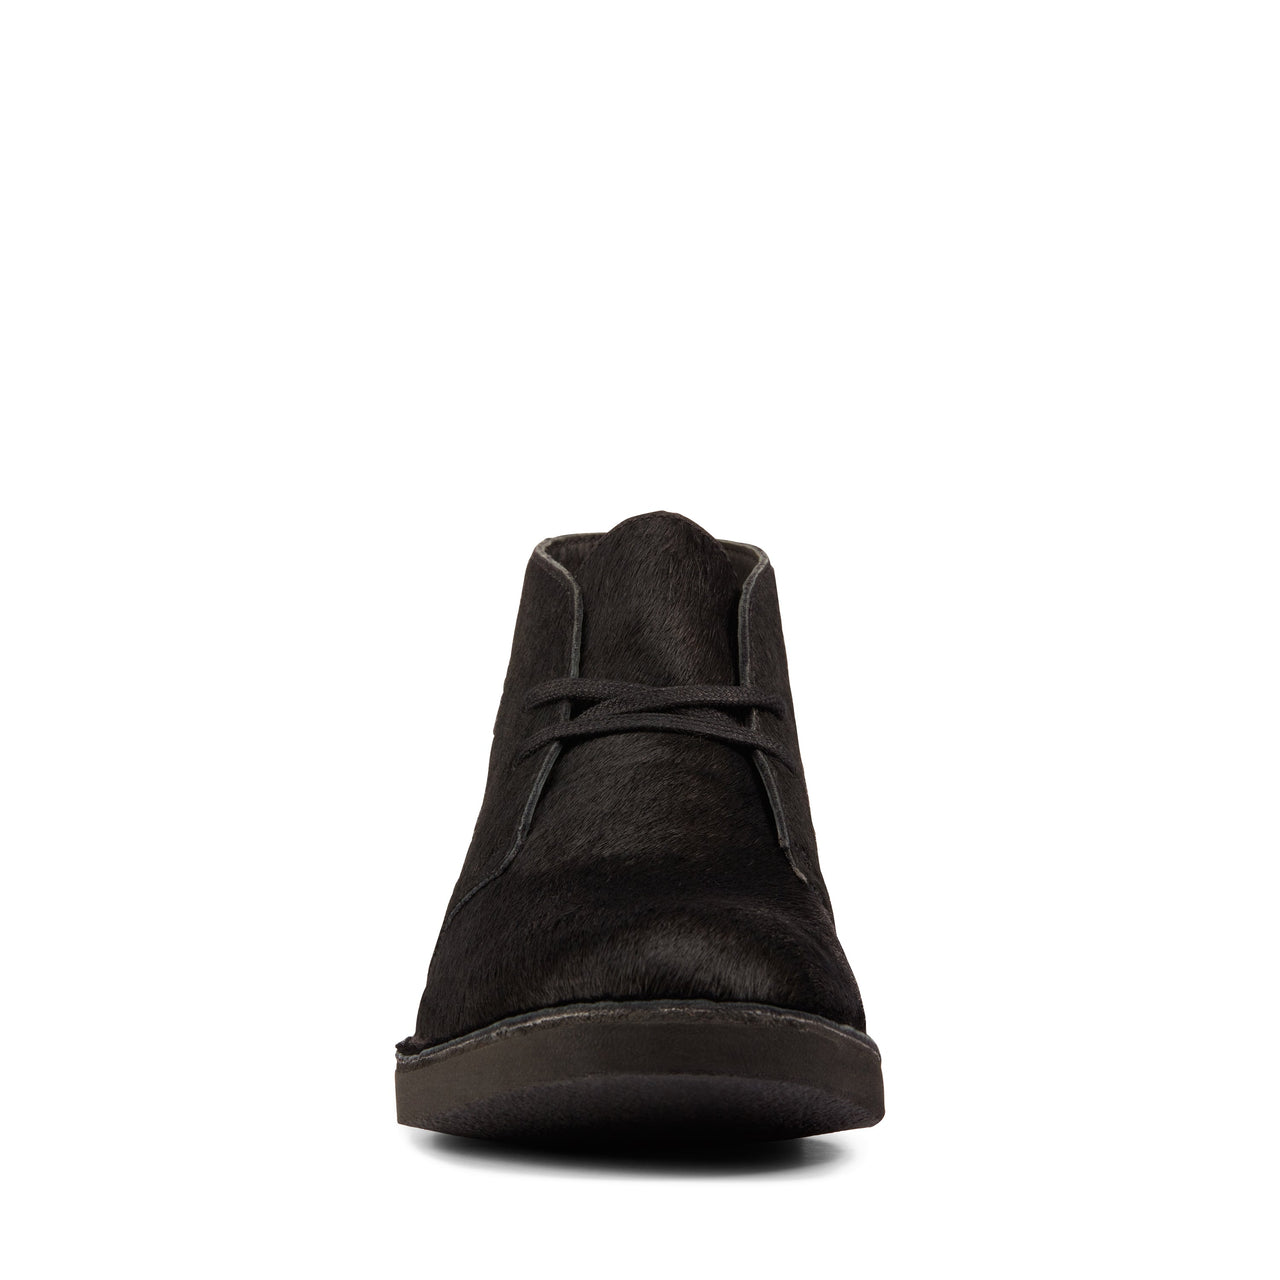 Black Clarks Womens Desert Boot 2 featuring cushioned footbed and durable crepe sole